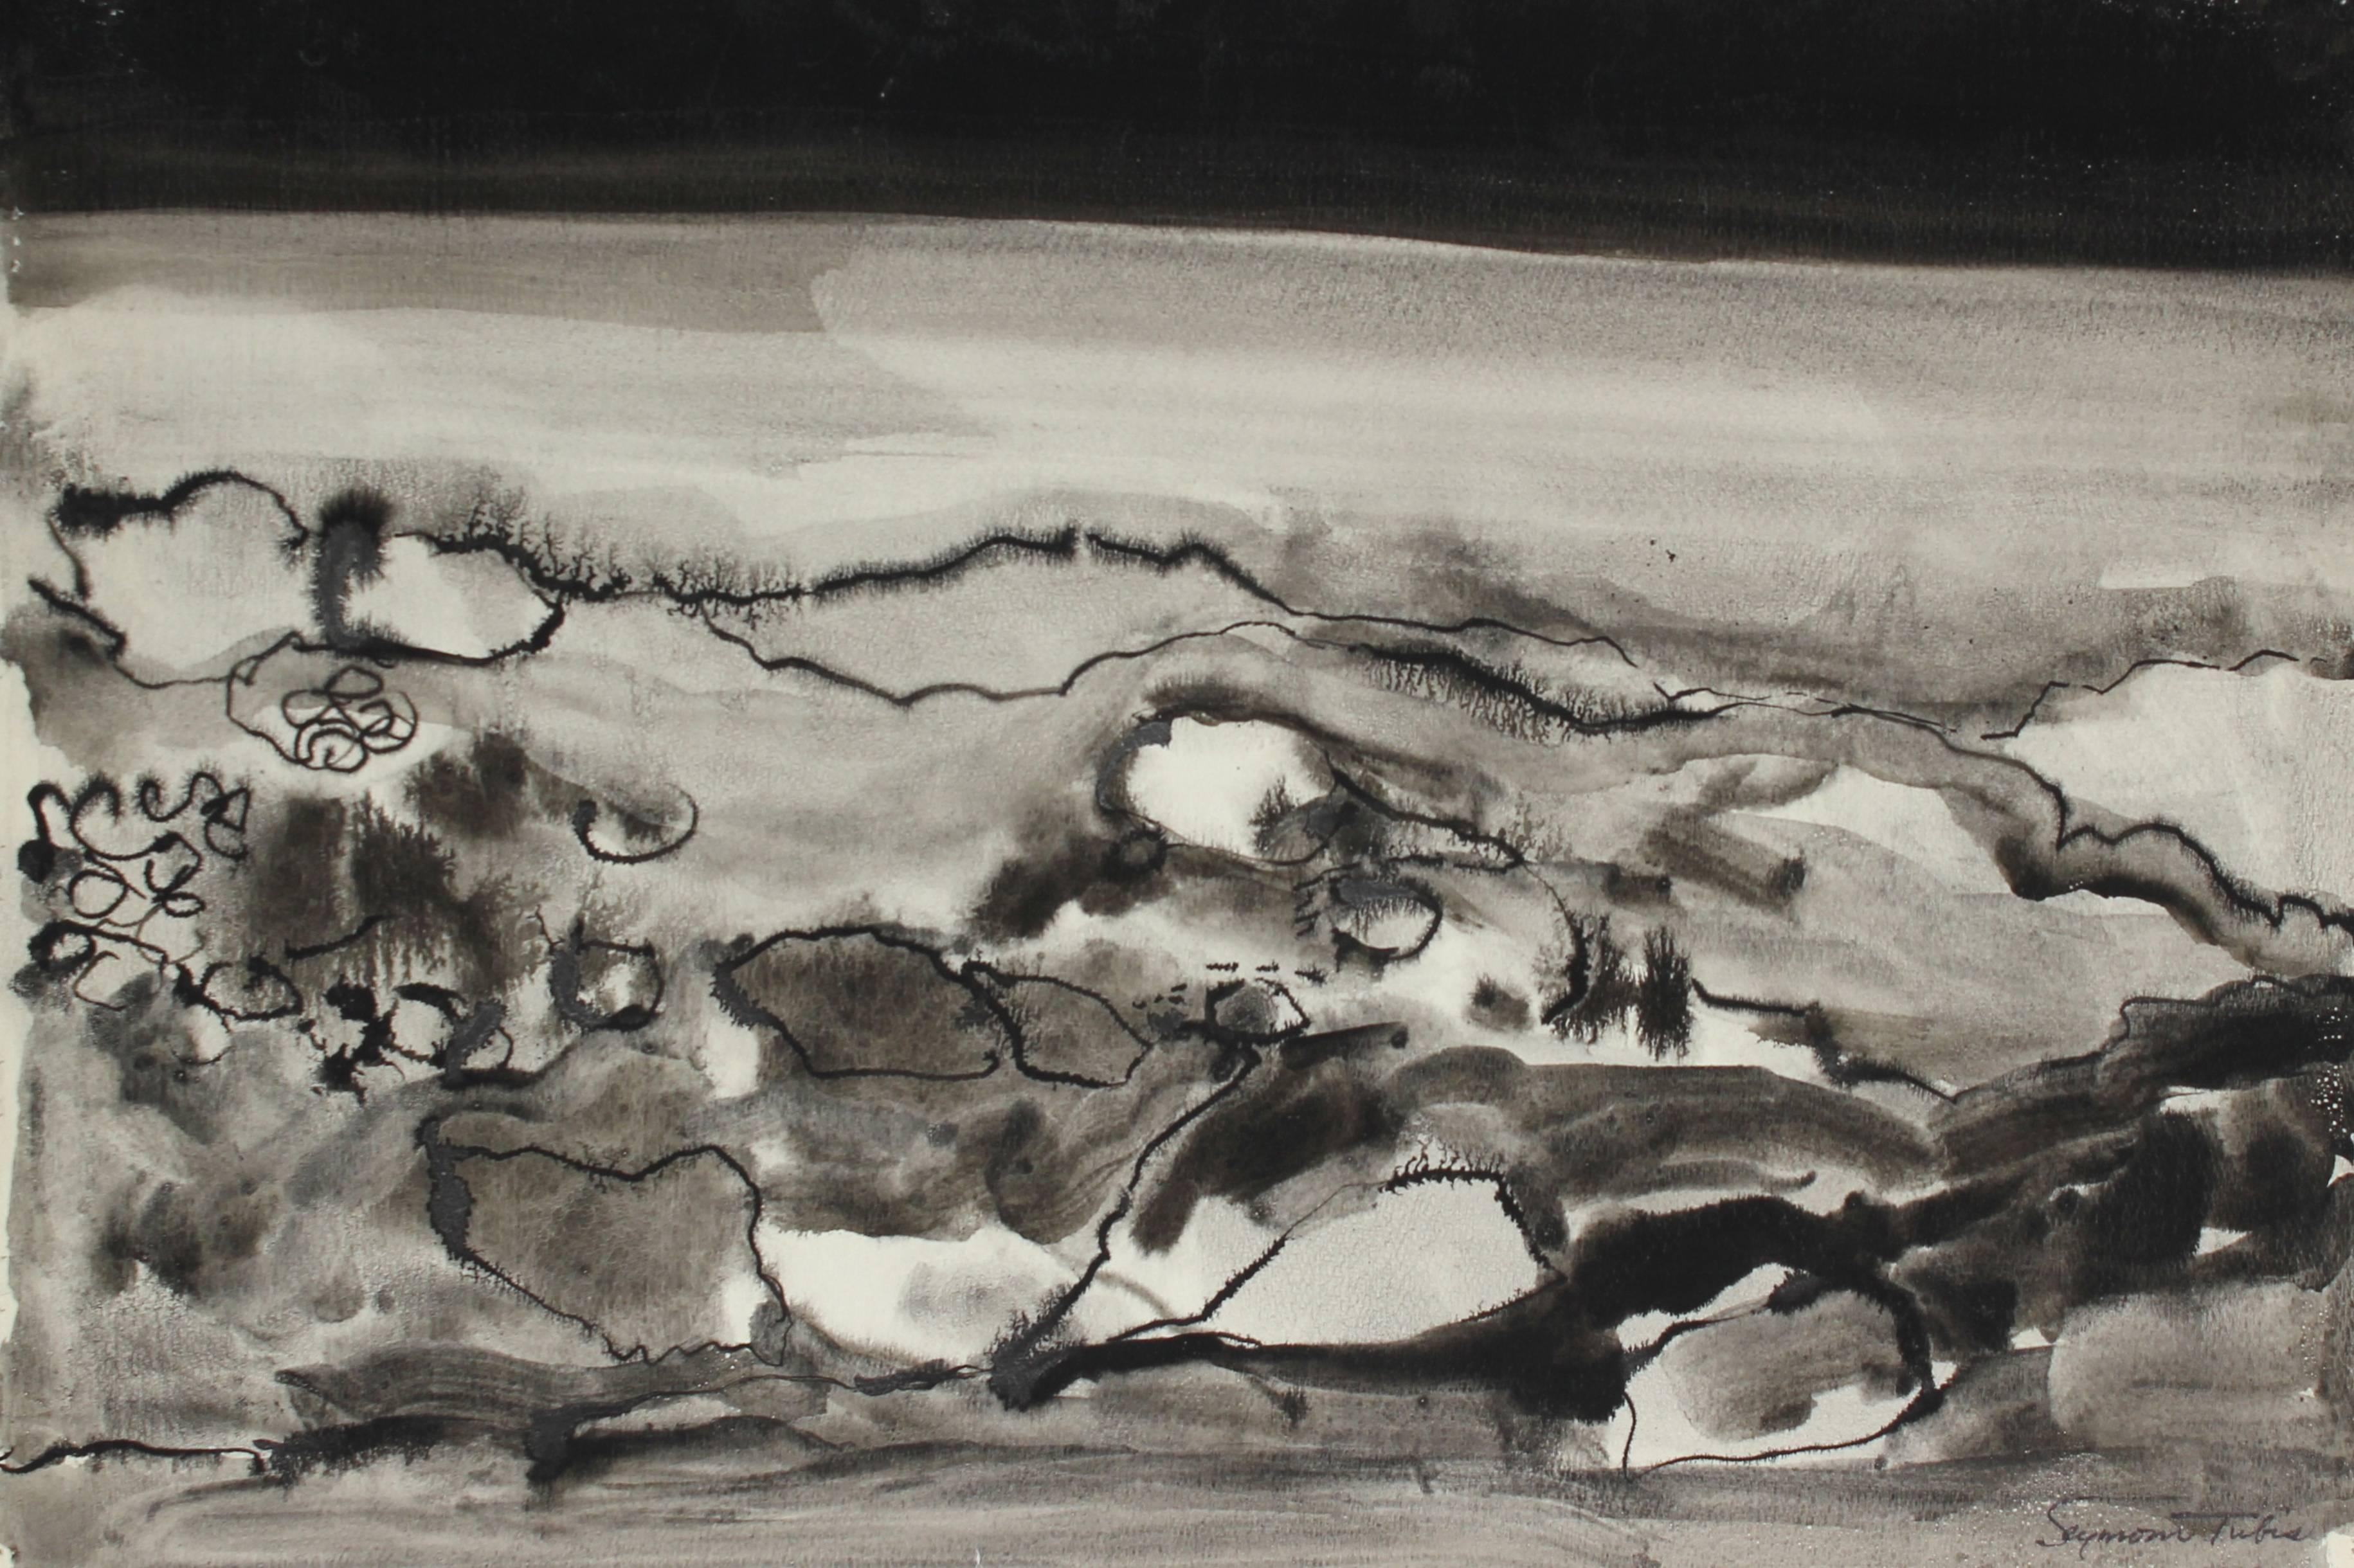 Seymour Tubis Abstract Drawing - Monochromatic Abstract in Ink, 20th Century